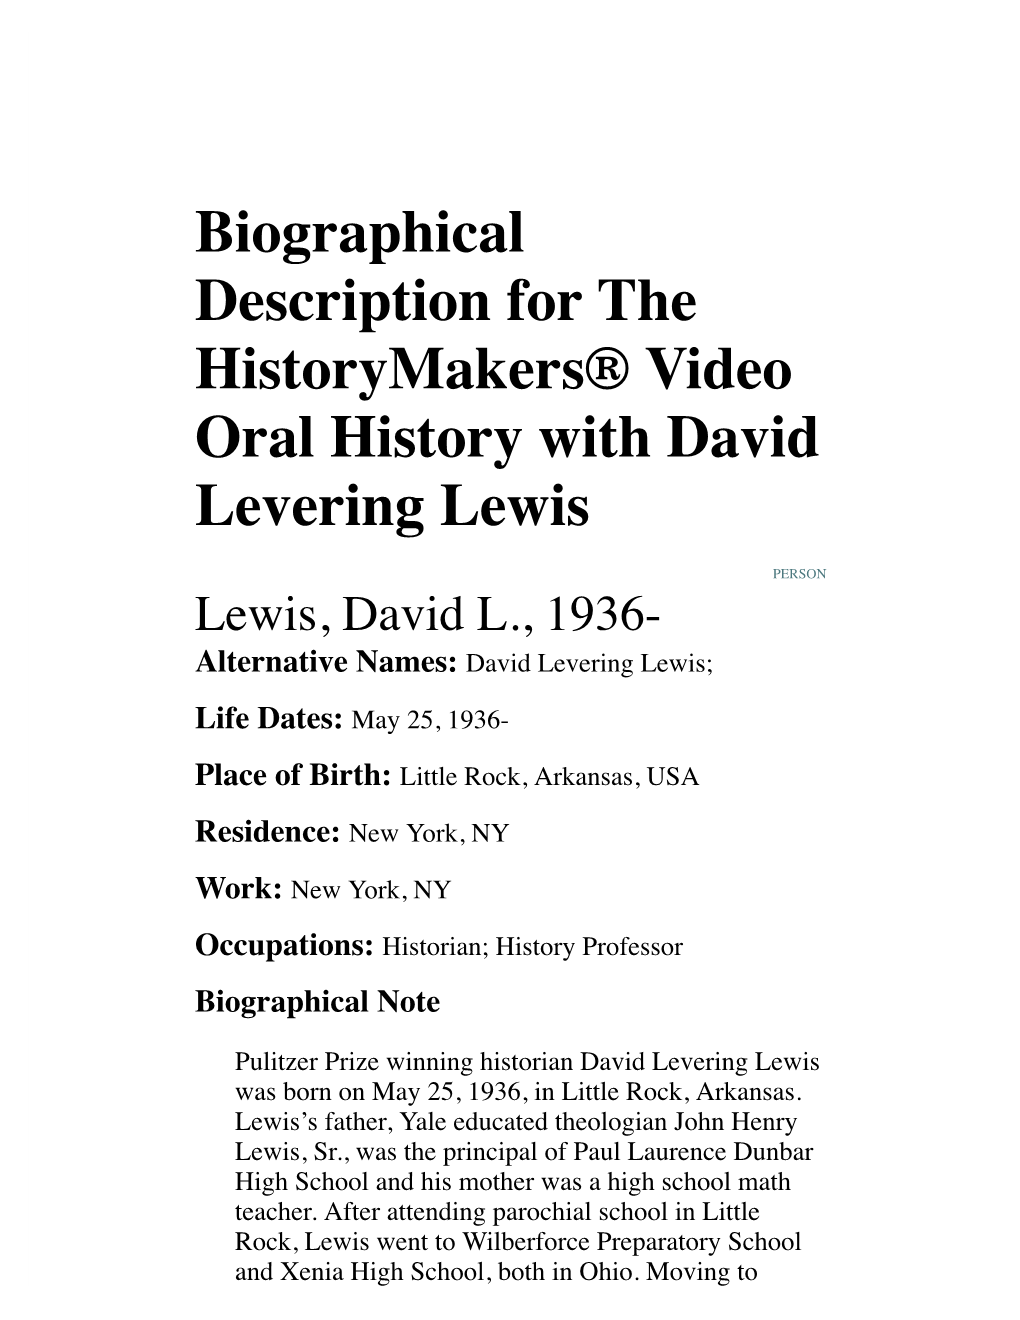 Biographical Description for the Historymakers® Video Oral History with David Levering Lewis